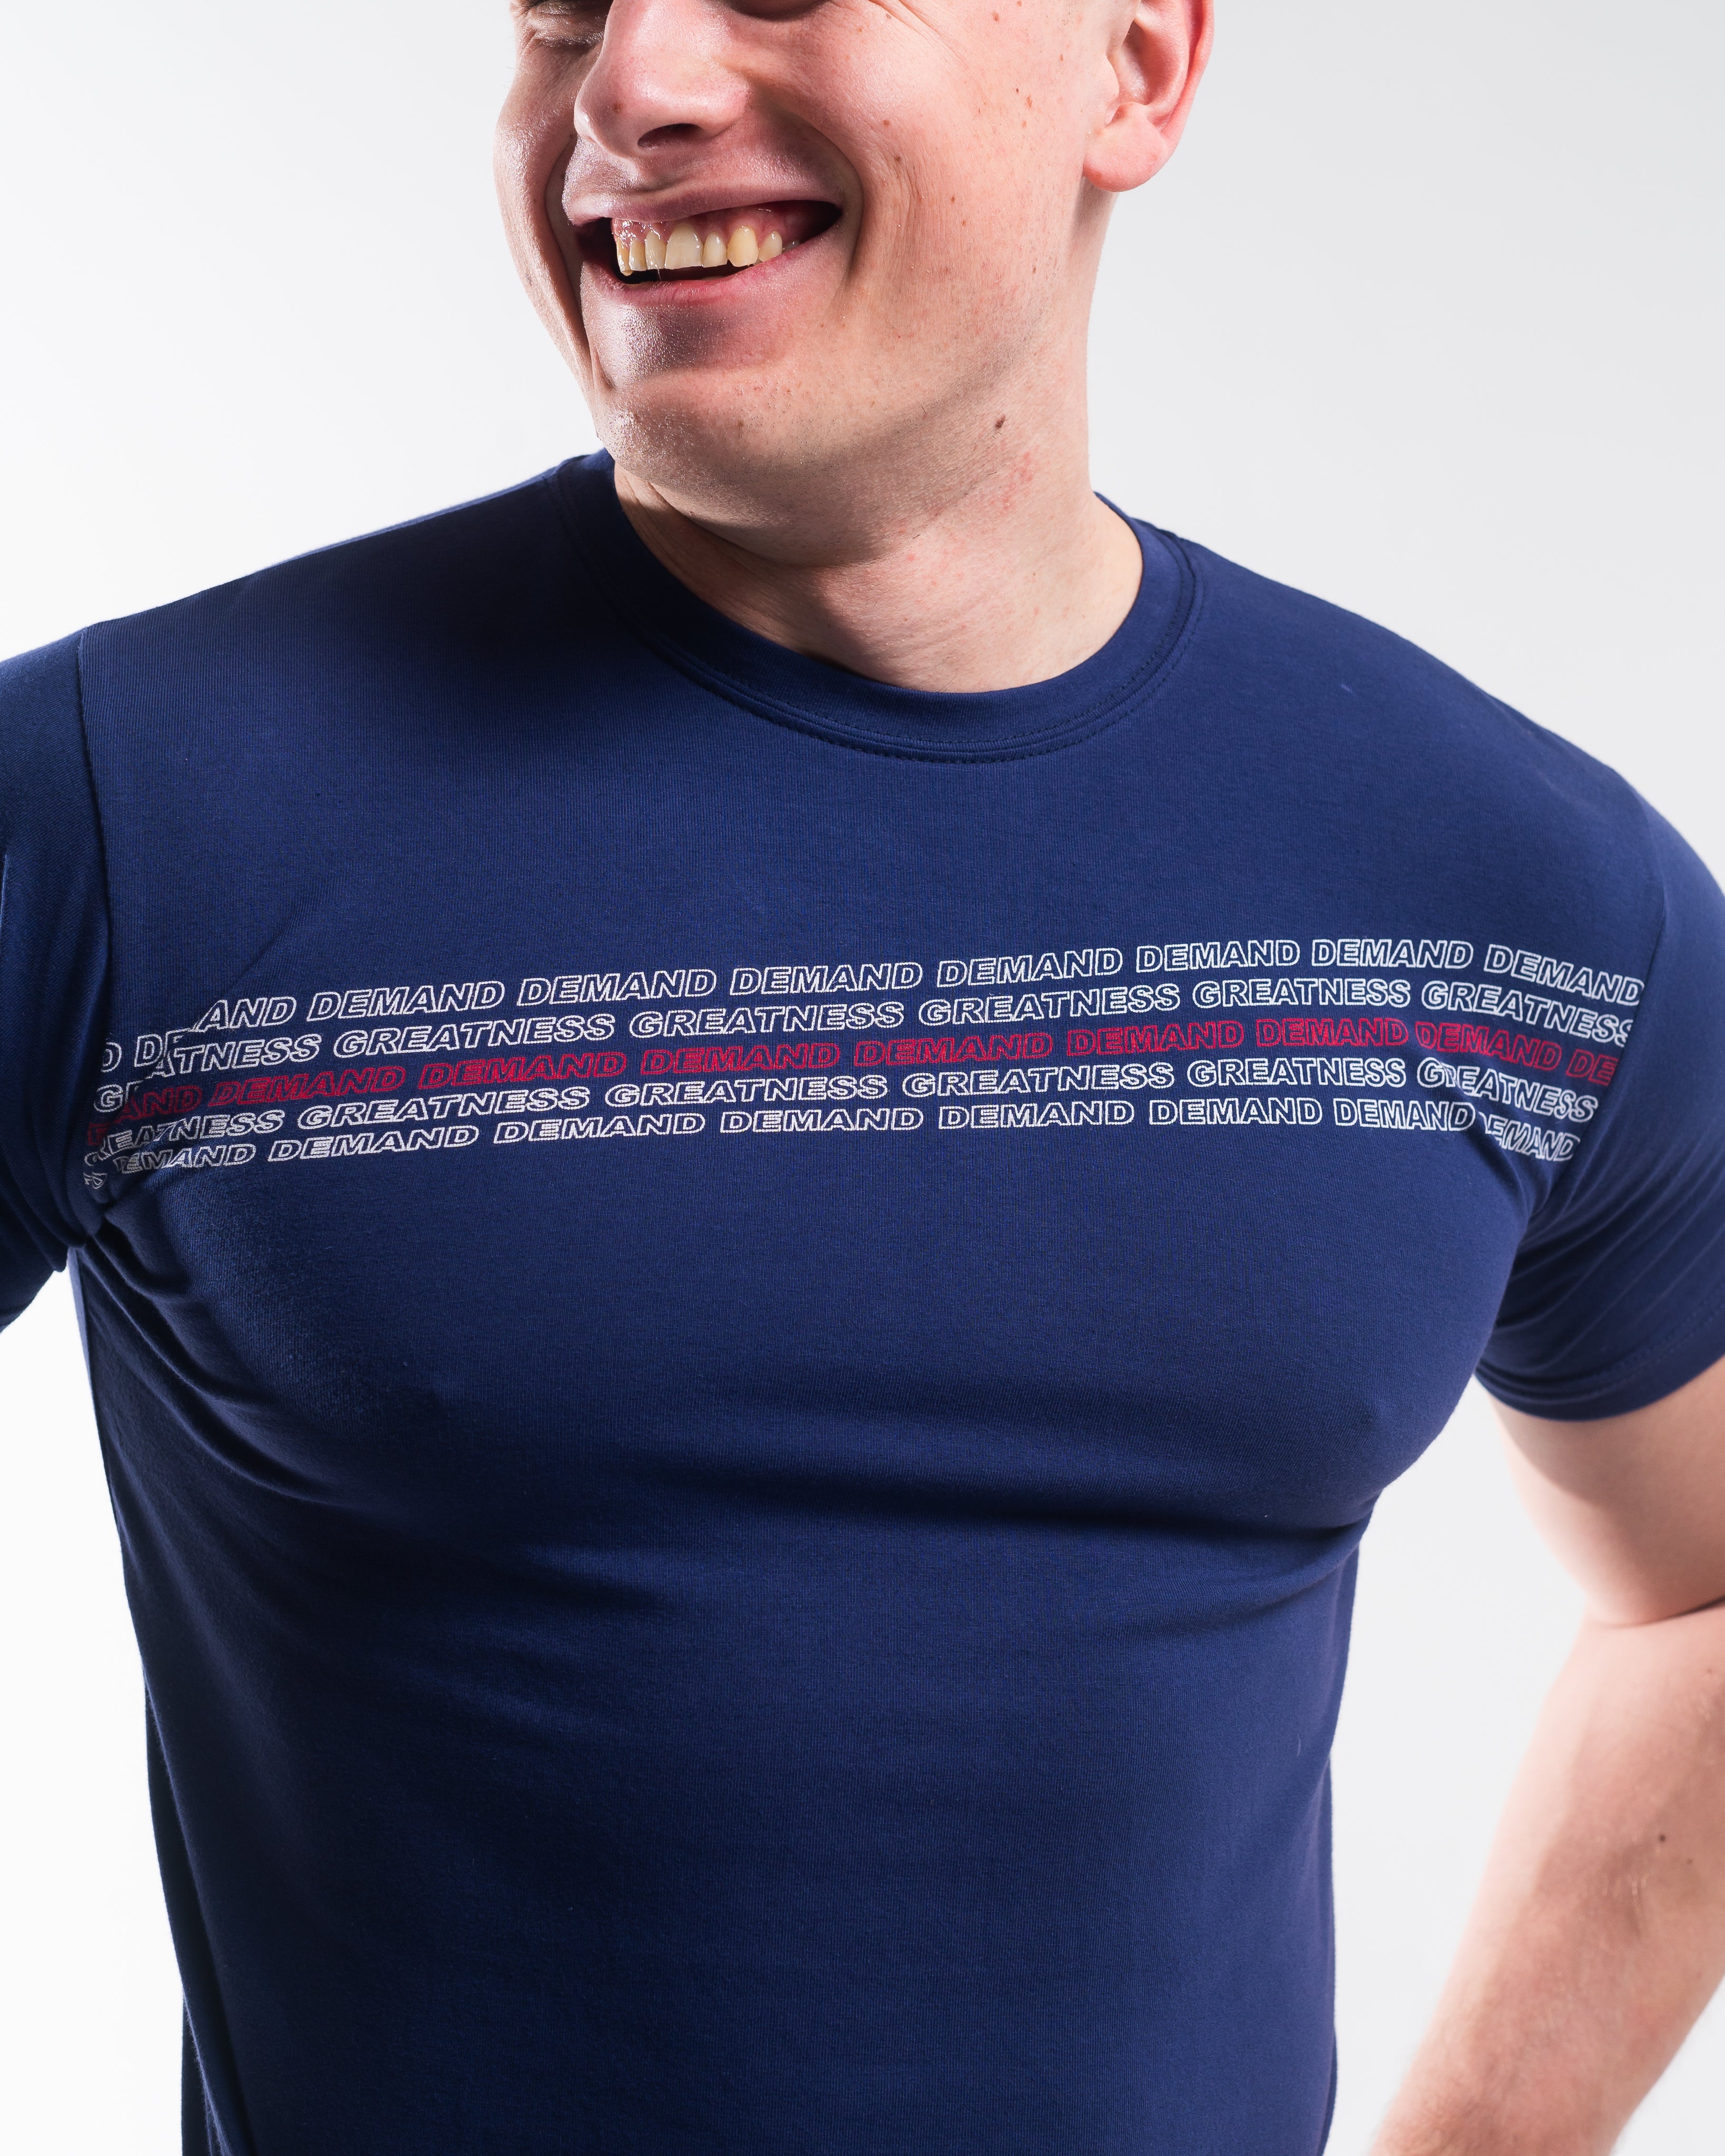 Night Light RWB Wave Non Bar Grip Shirt features one of our favorite designs that showcases your patriotic spirit with our Red White and Blue colour palette! All A7 Powerlifting Equipment shipping to UK, Norway, Switzerland and Iceland.